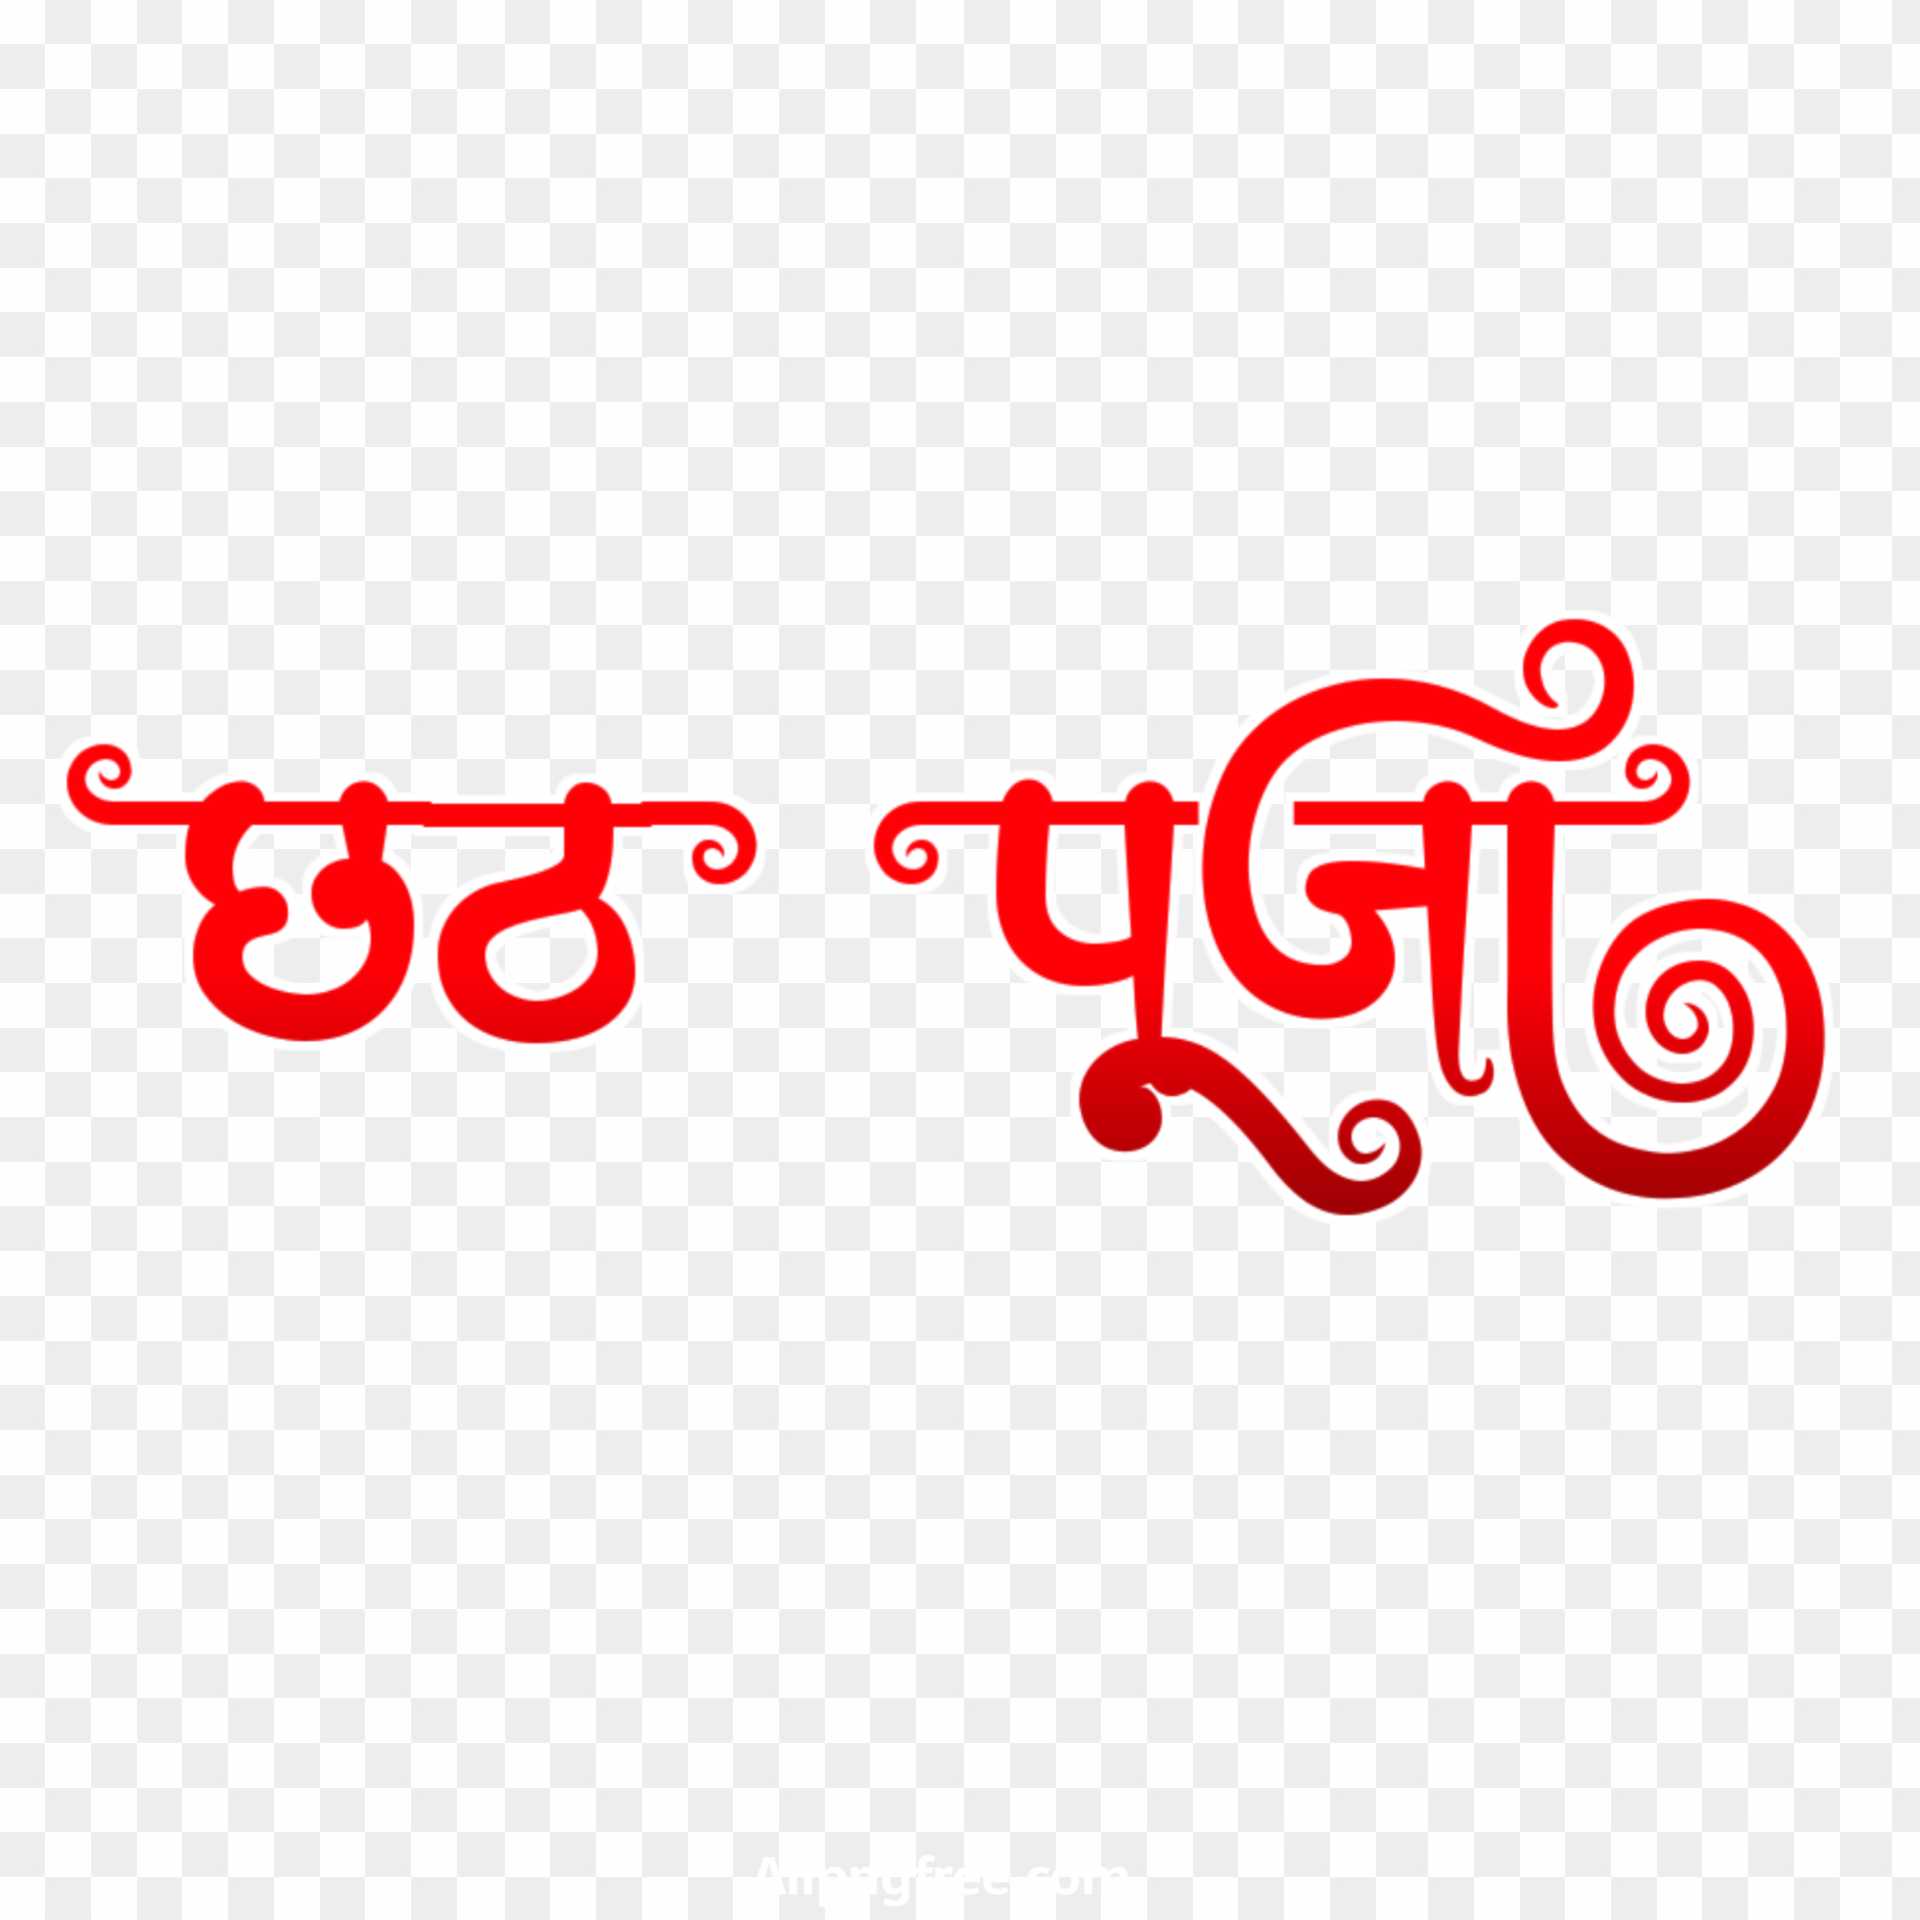 Happy chhath Puja text png transparent image 